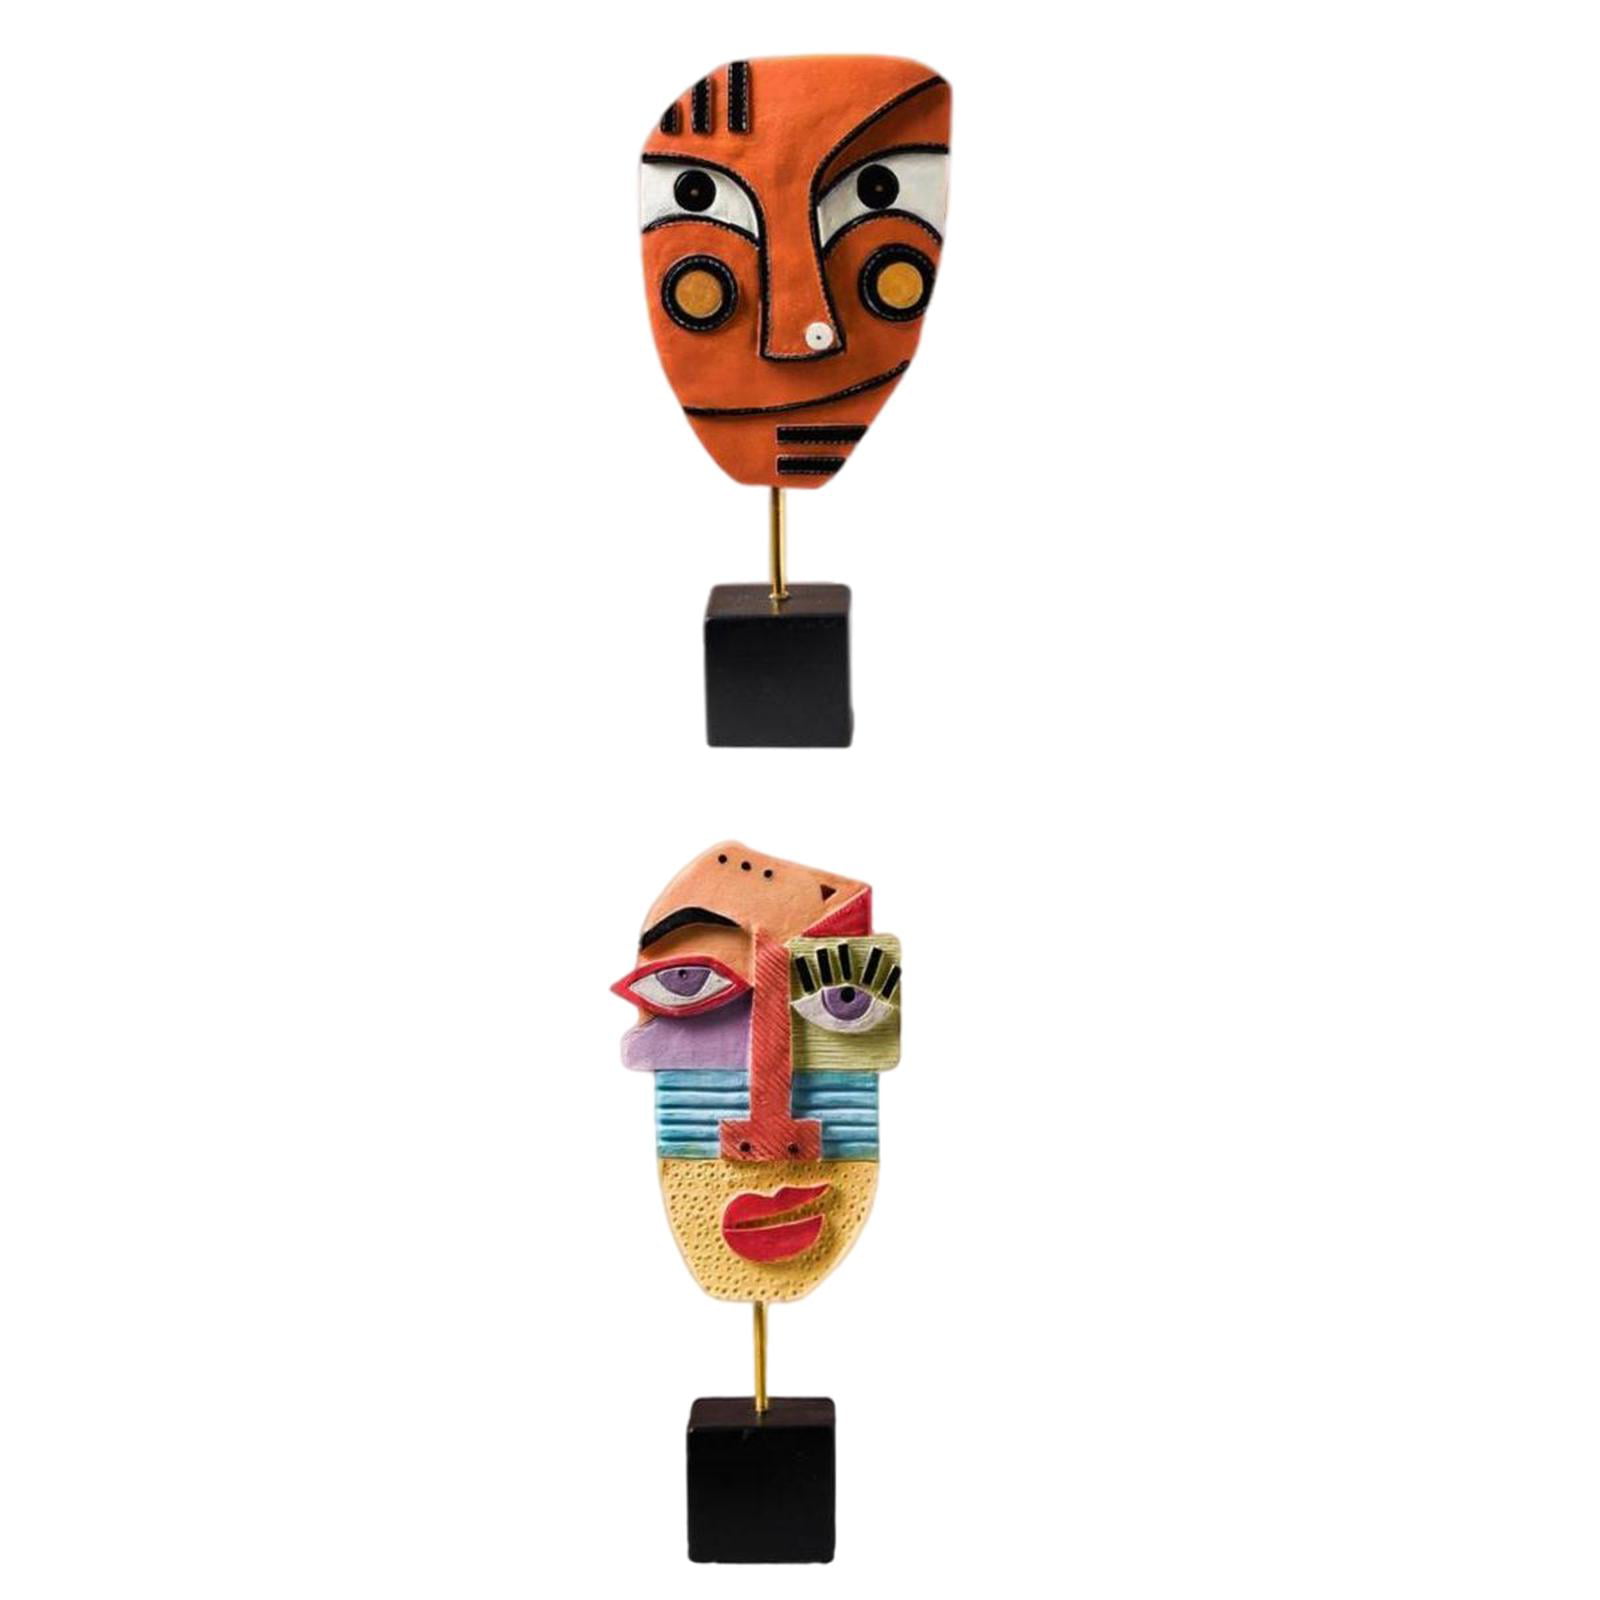 Abstract Face Resin Statue Crafts Sculpture Ornament Art Office Home Decoration 